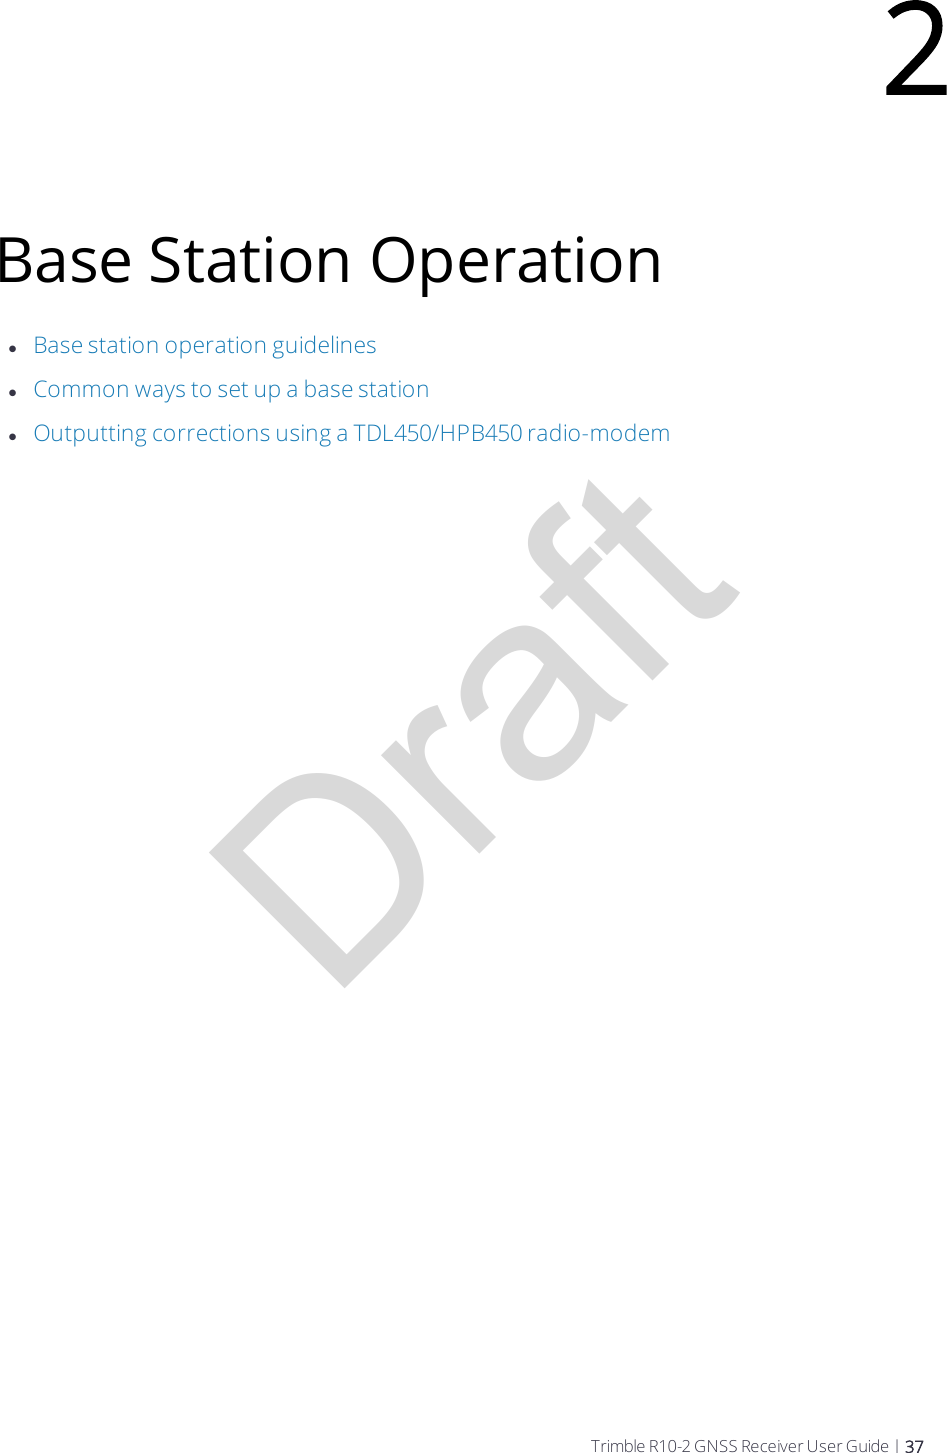 DraftBase Station OperationlBase station operation guidelineslCommon ways to set up a base stationlOutputting corrections using a TDL450/HPB450 radio-modem2Trimble R10-2 GNSS Receiver User Guide | 37